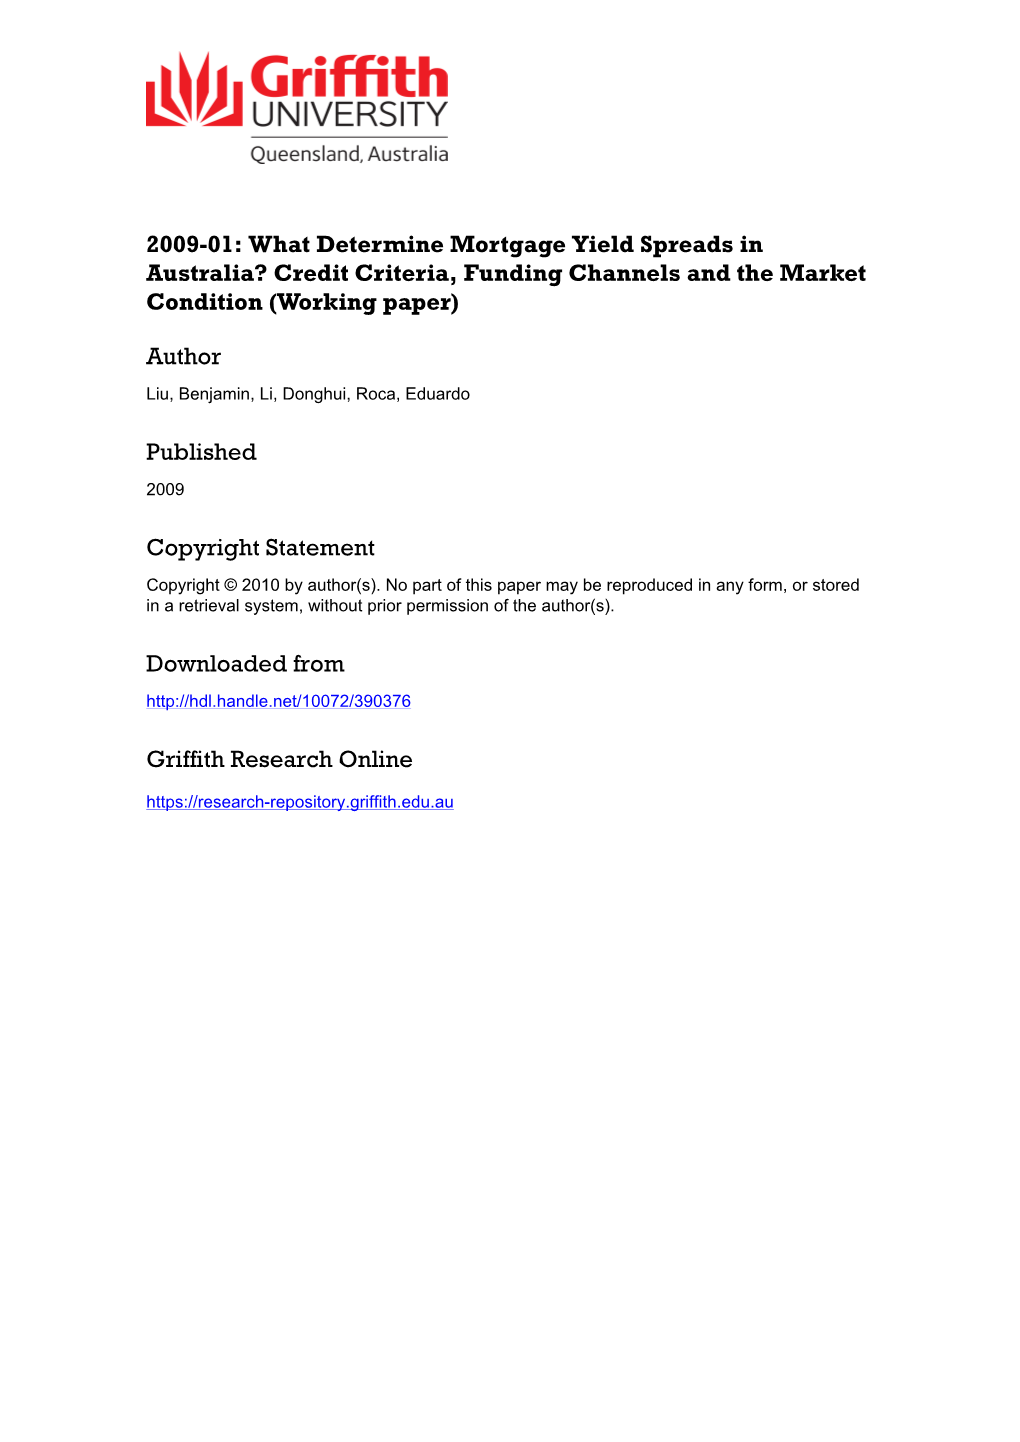 What Determine Mortgage Yield Spreads in Australia? Credit Criteria, Funding Channels and the Market Condition (Working Paper)